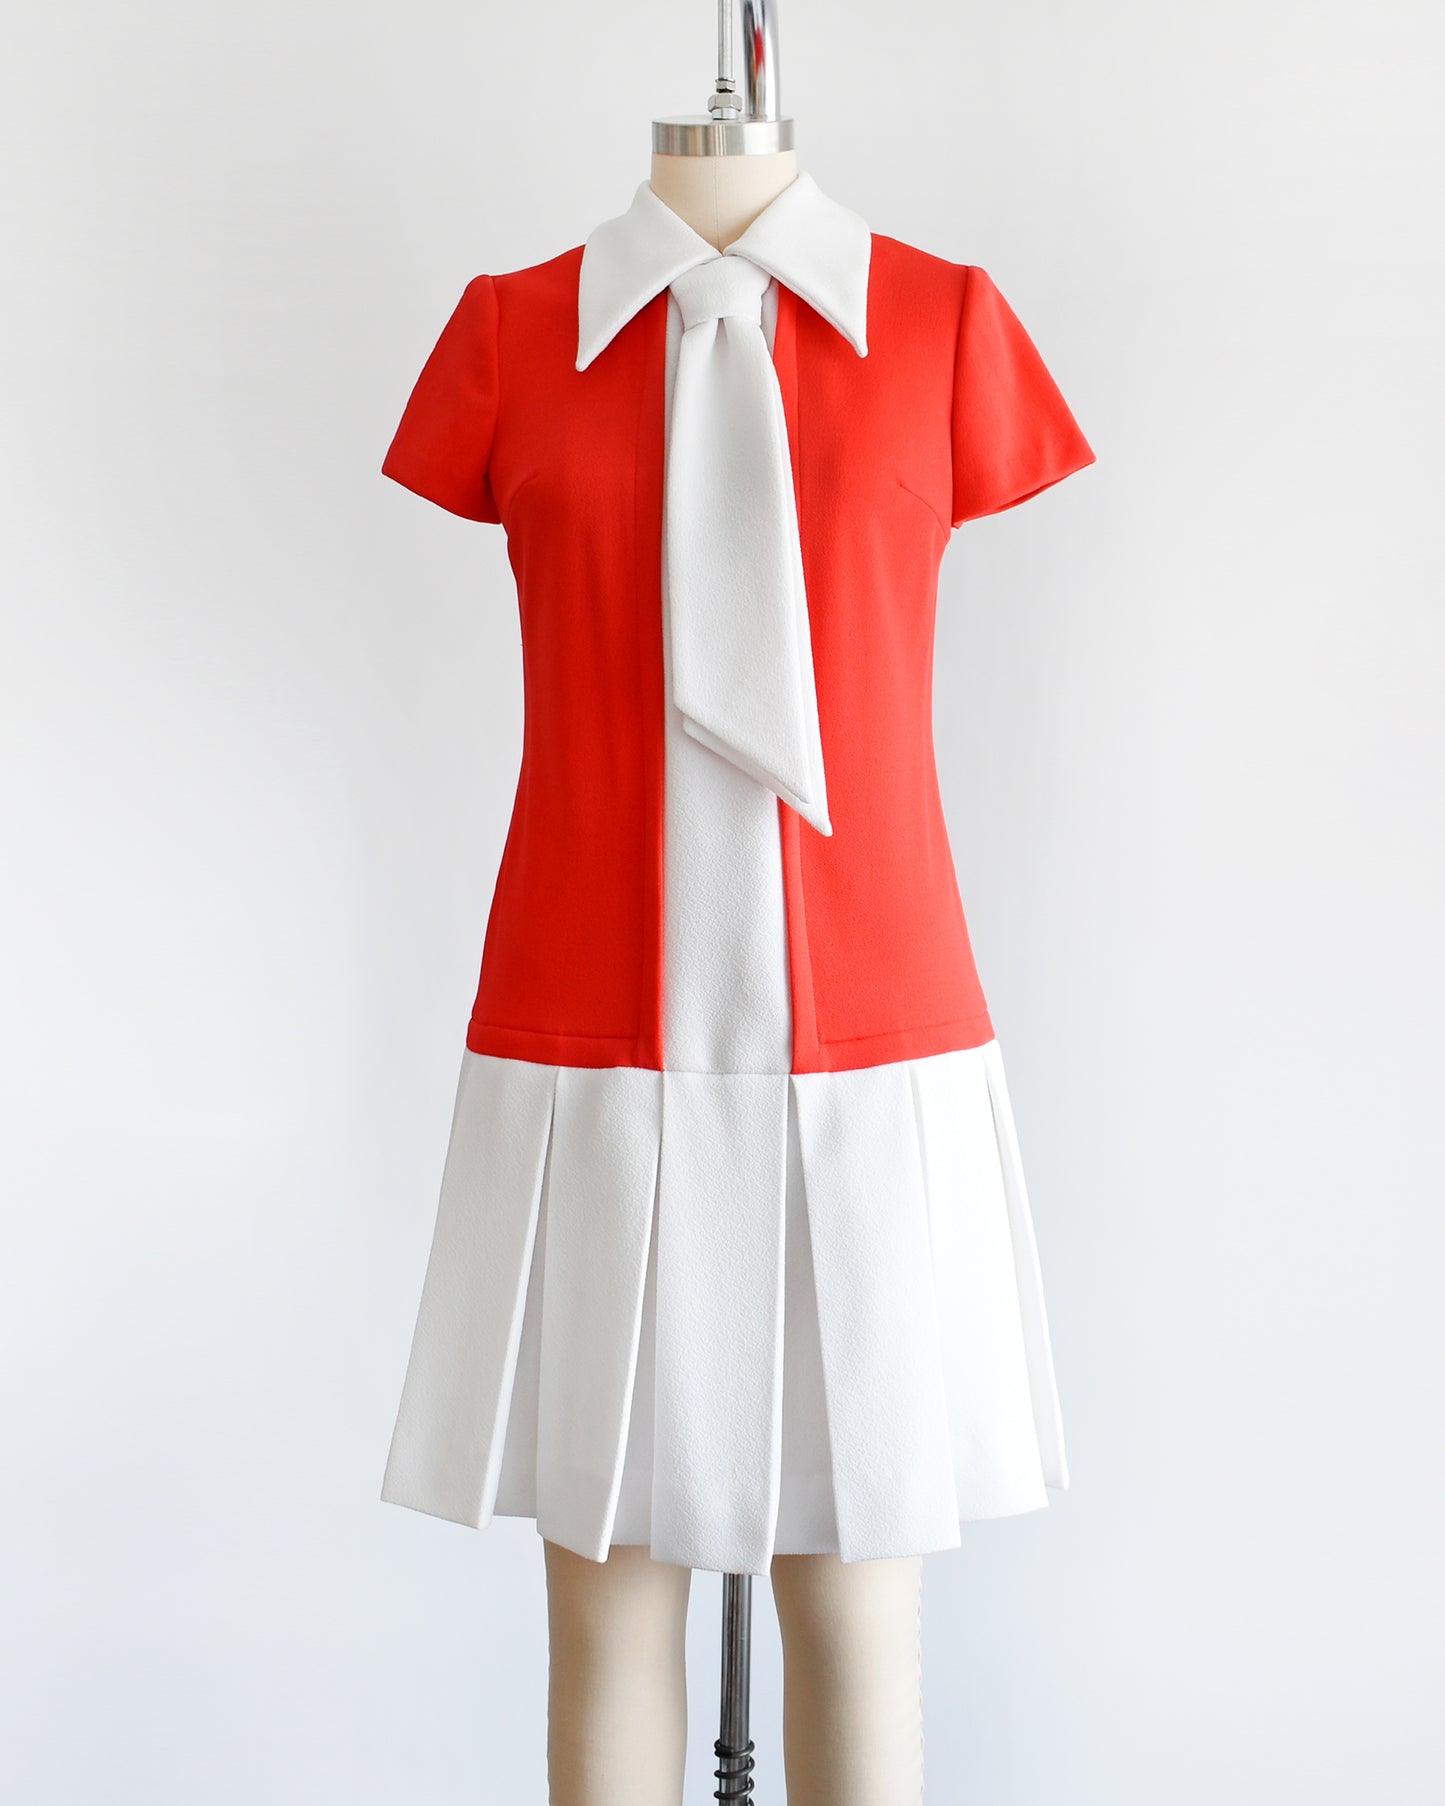 A vintage late 1960s early 1970s drop waist dress features a red bodice with a white collared neckline and ascot tie, accompanied by a white stripe down the front that flows into the white pleated skirt